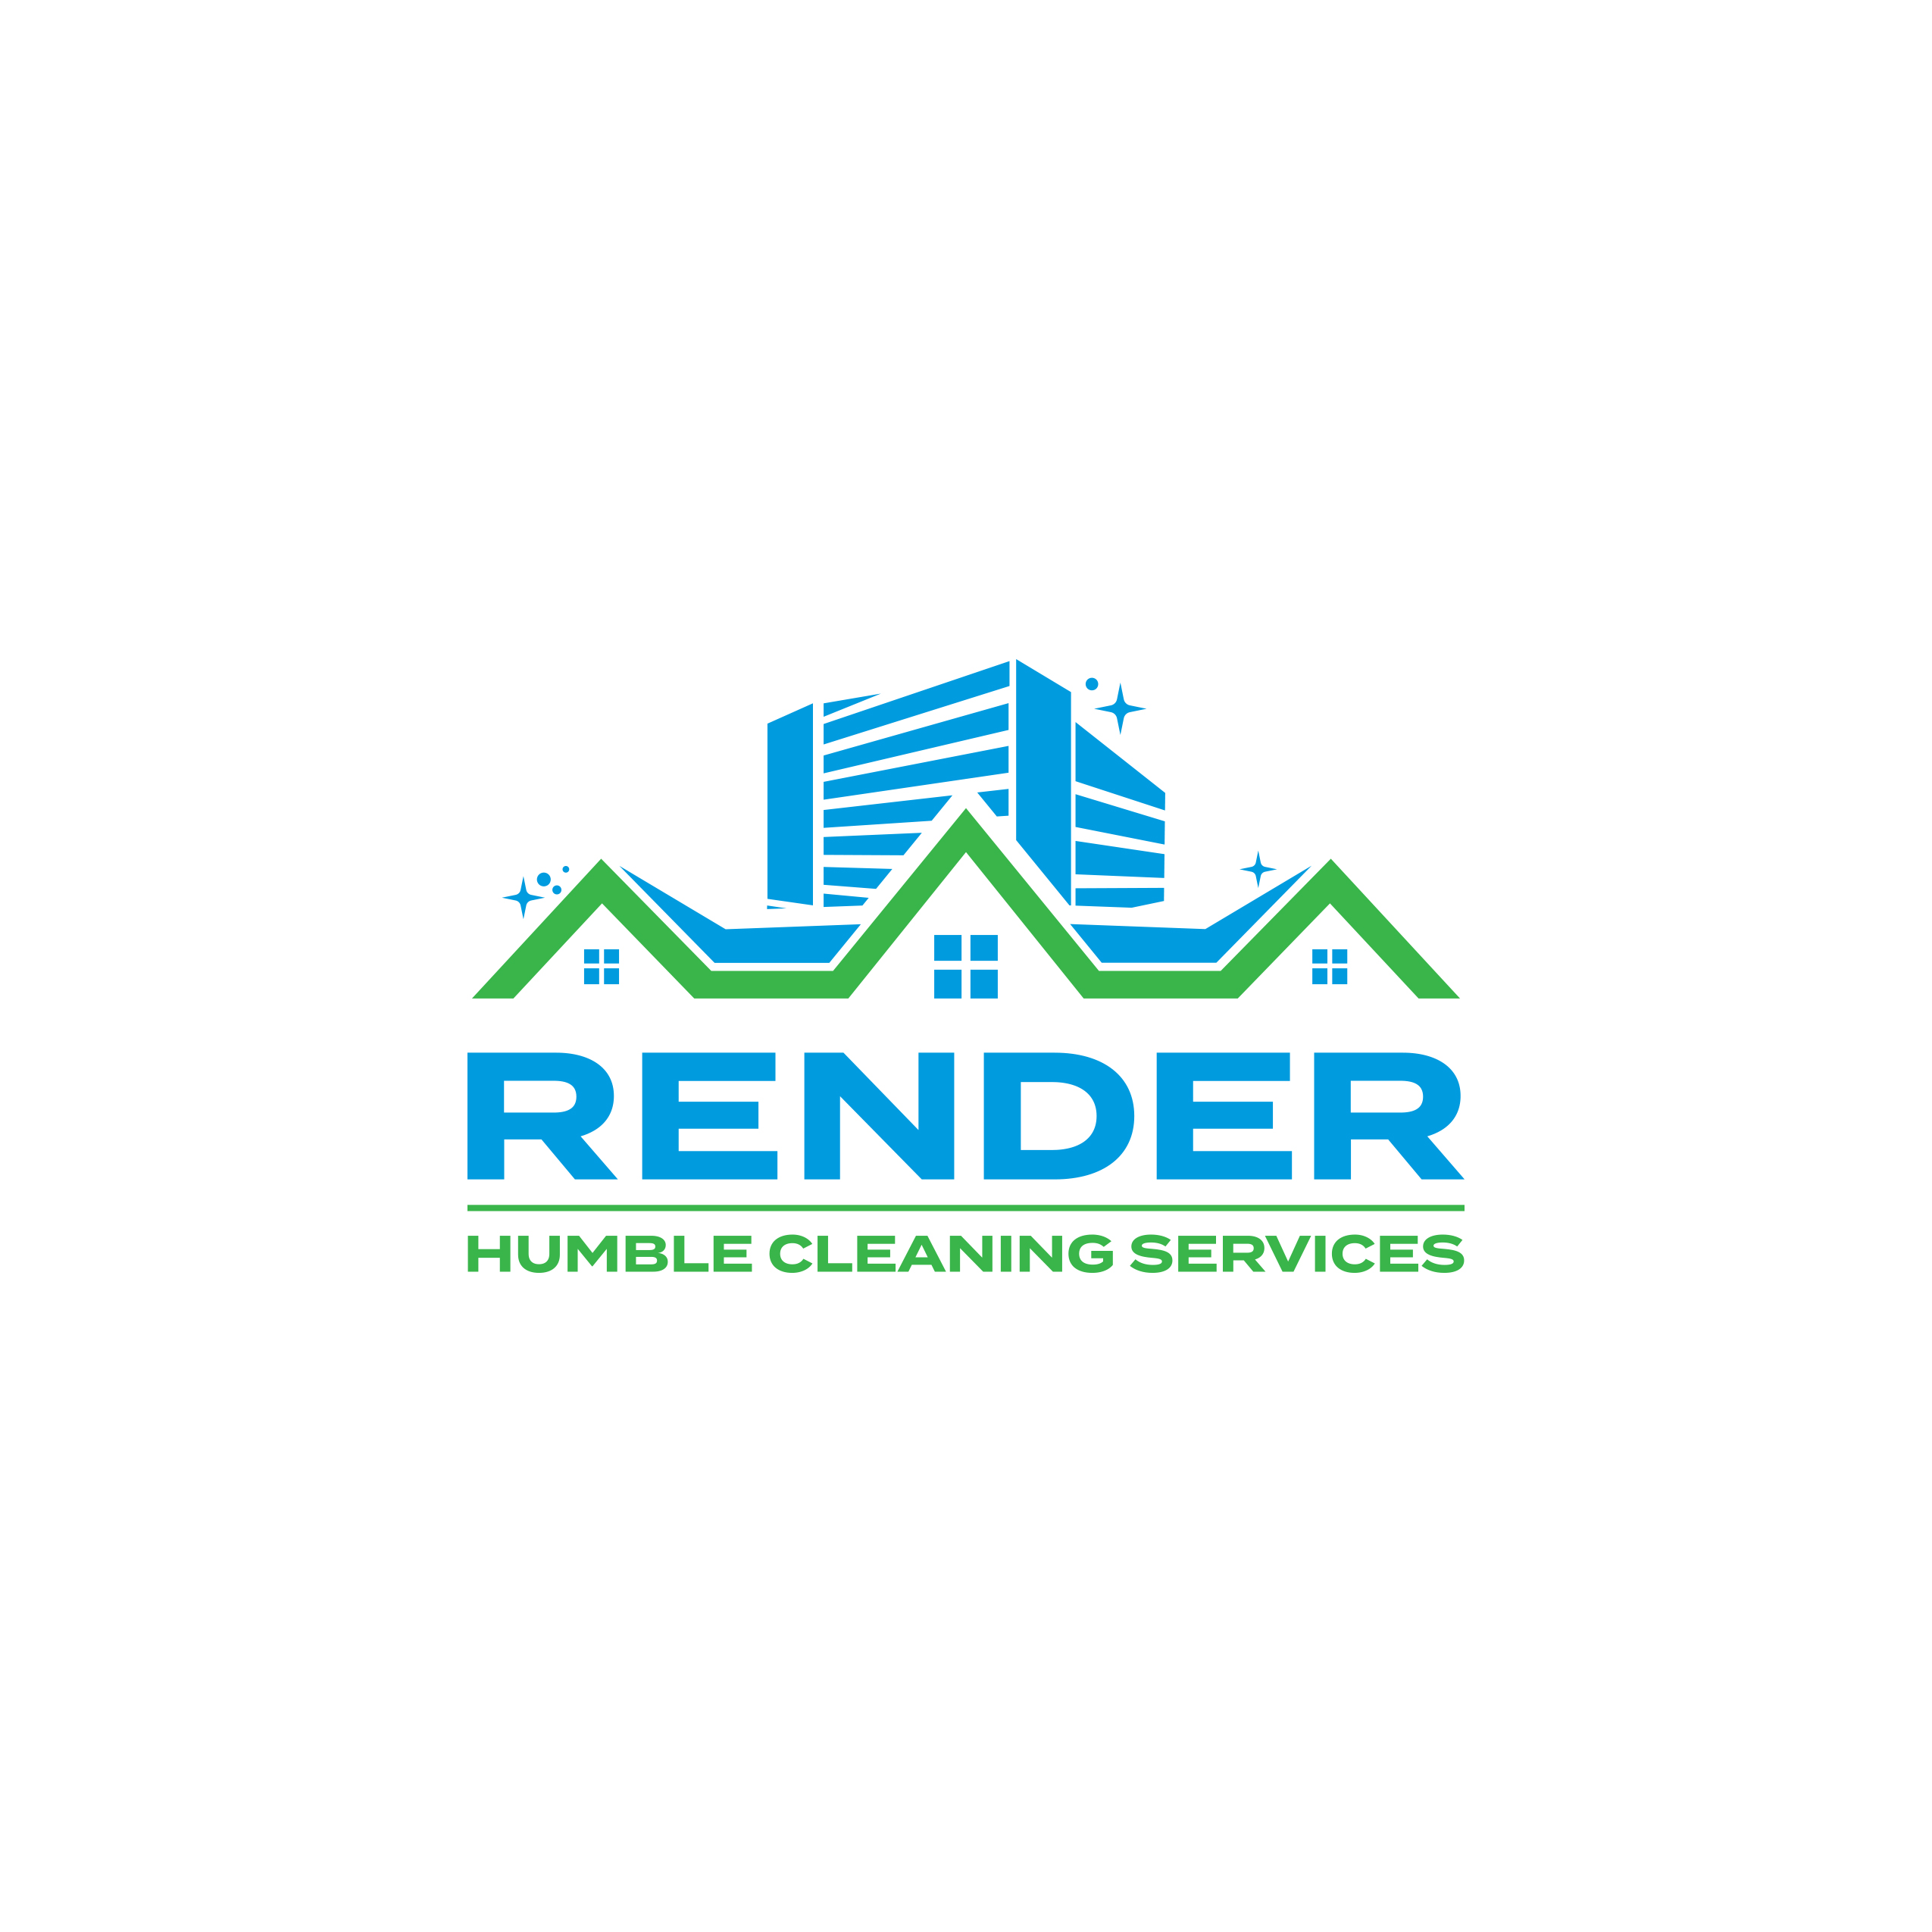 Render Humble Cleaning Services Logo